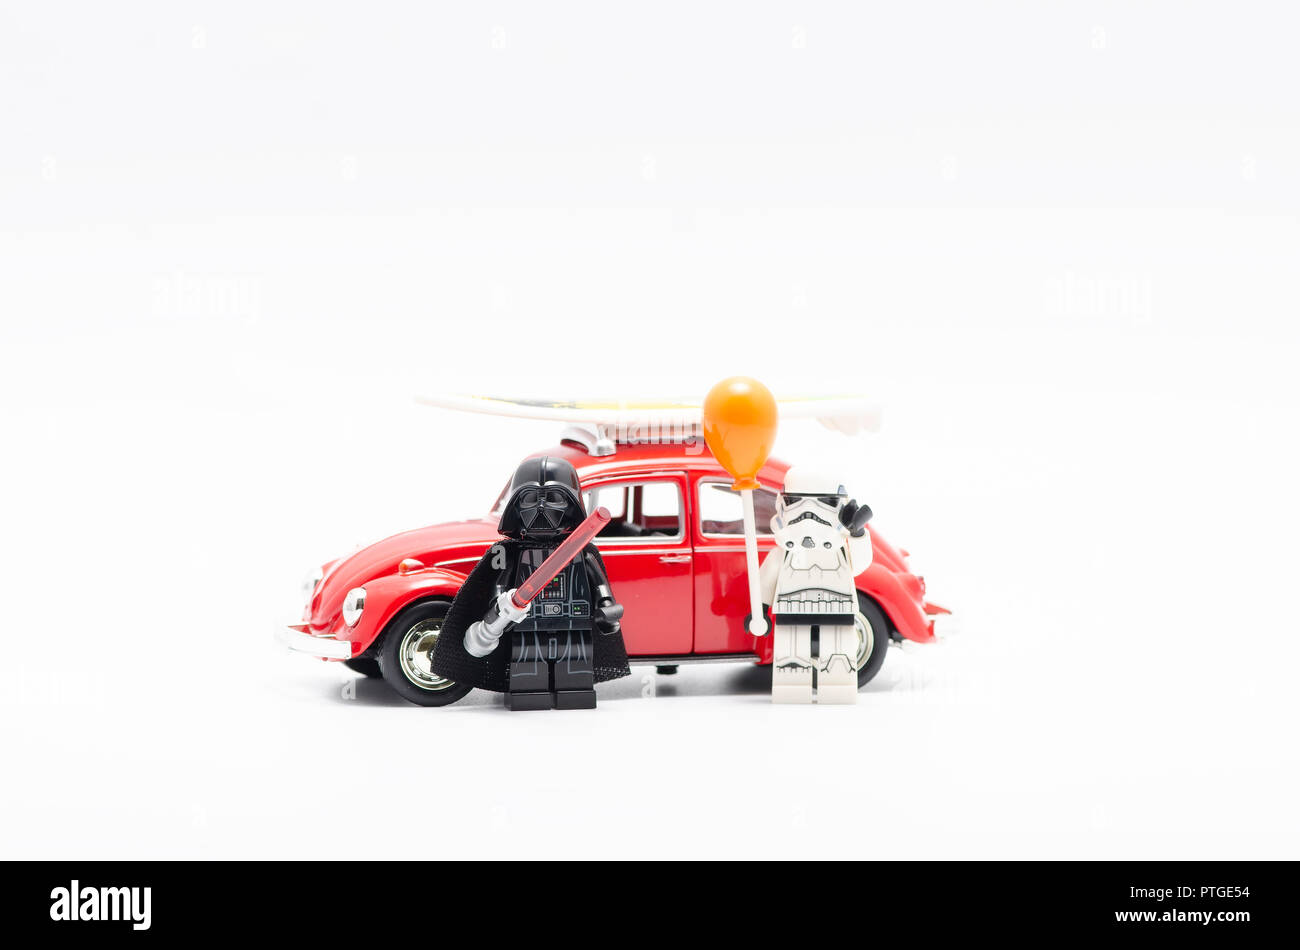 Lego darth vader and storm trooper holding balloon with volkswagen. Stock Photo